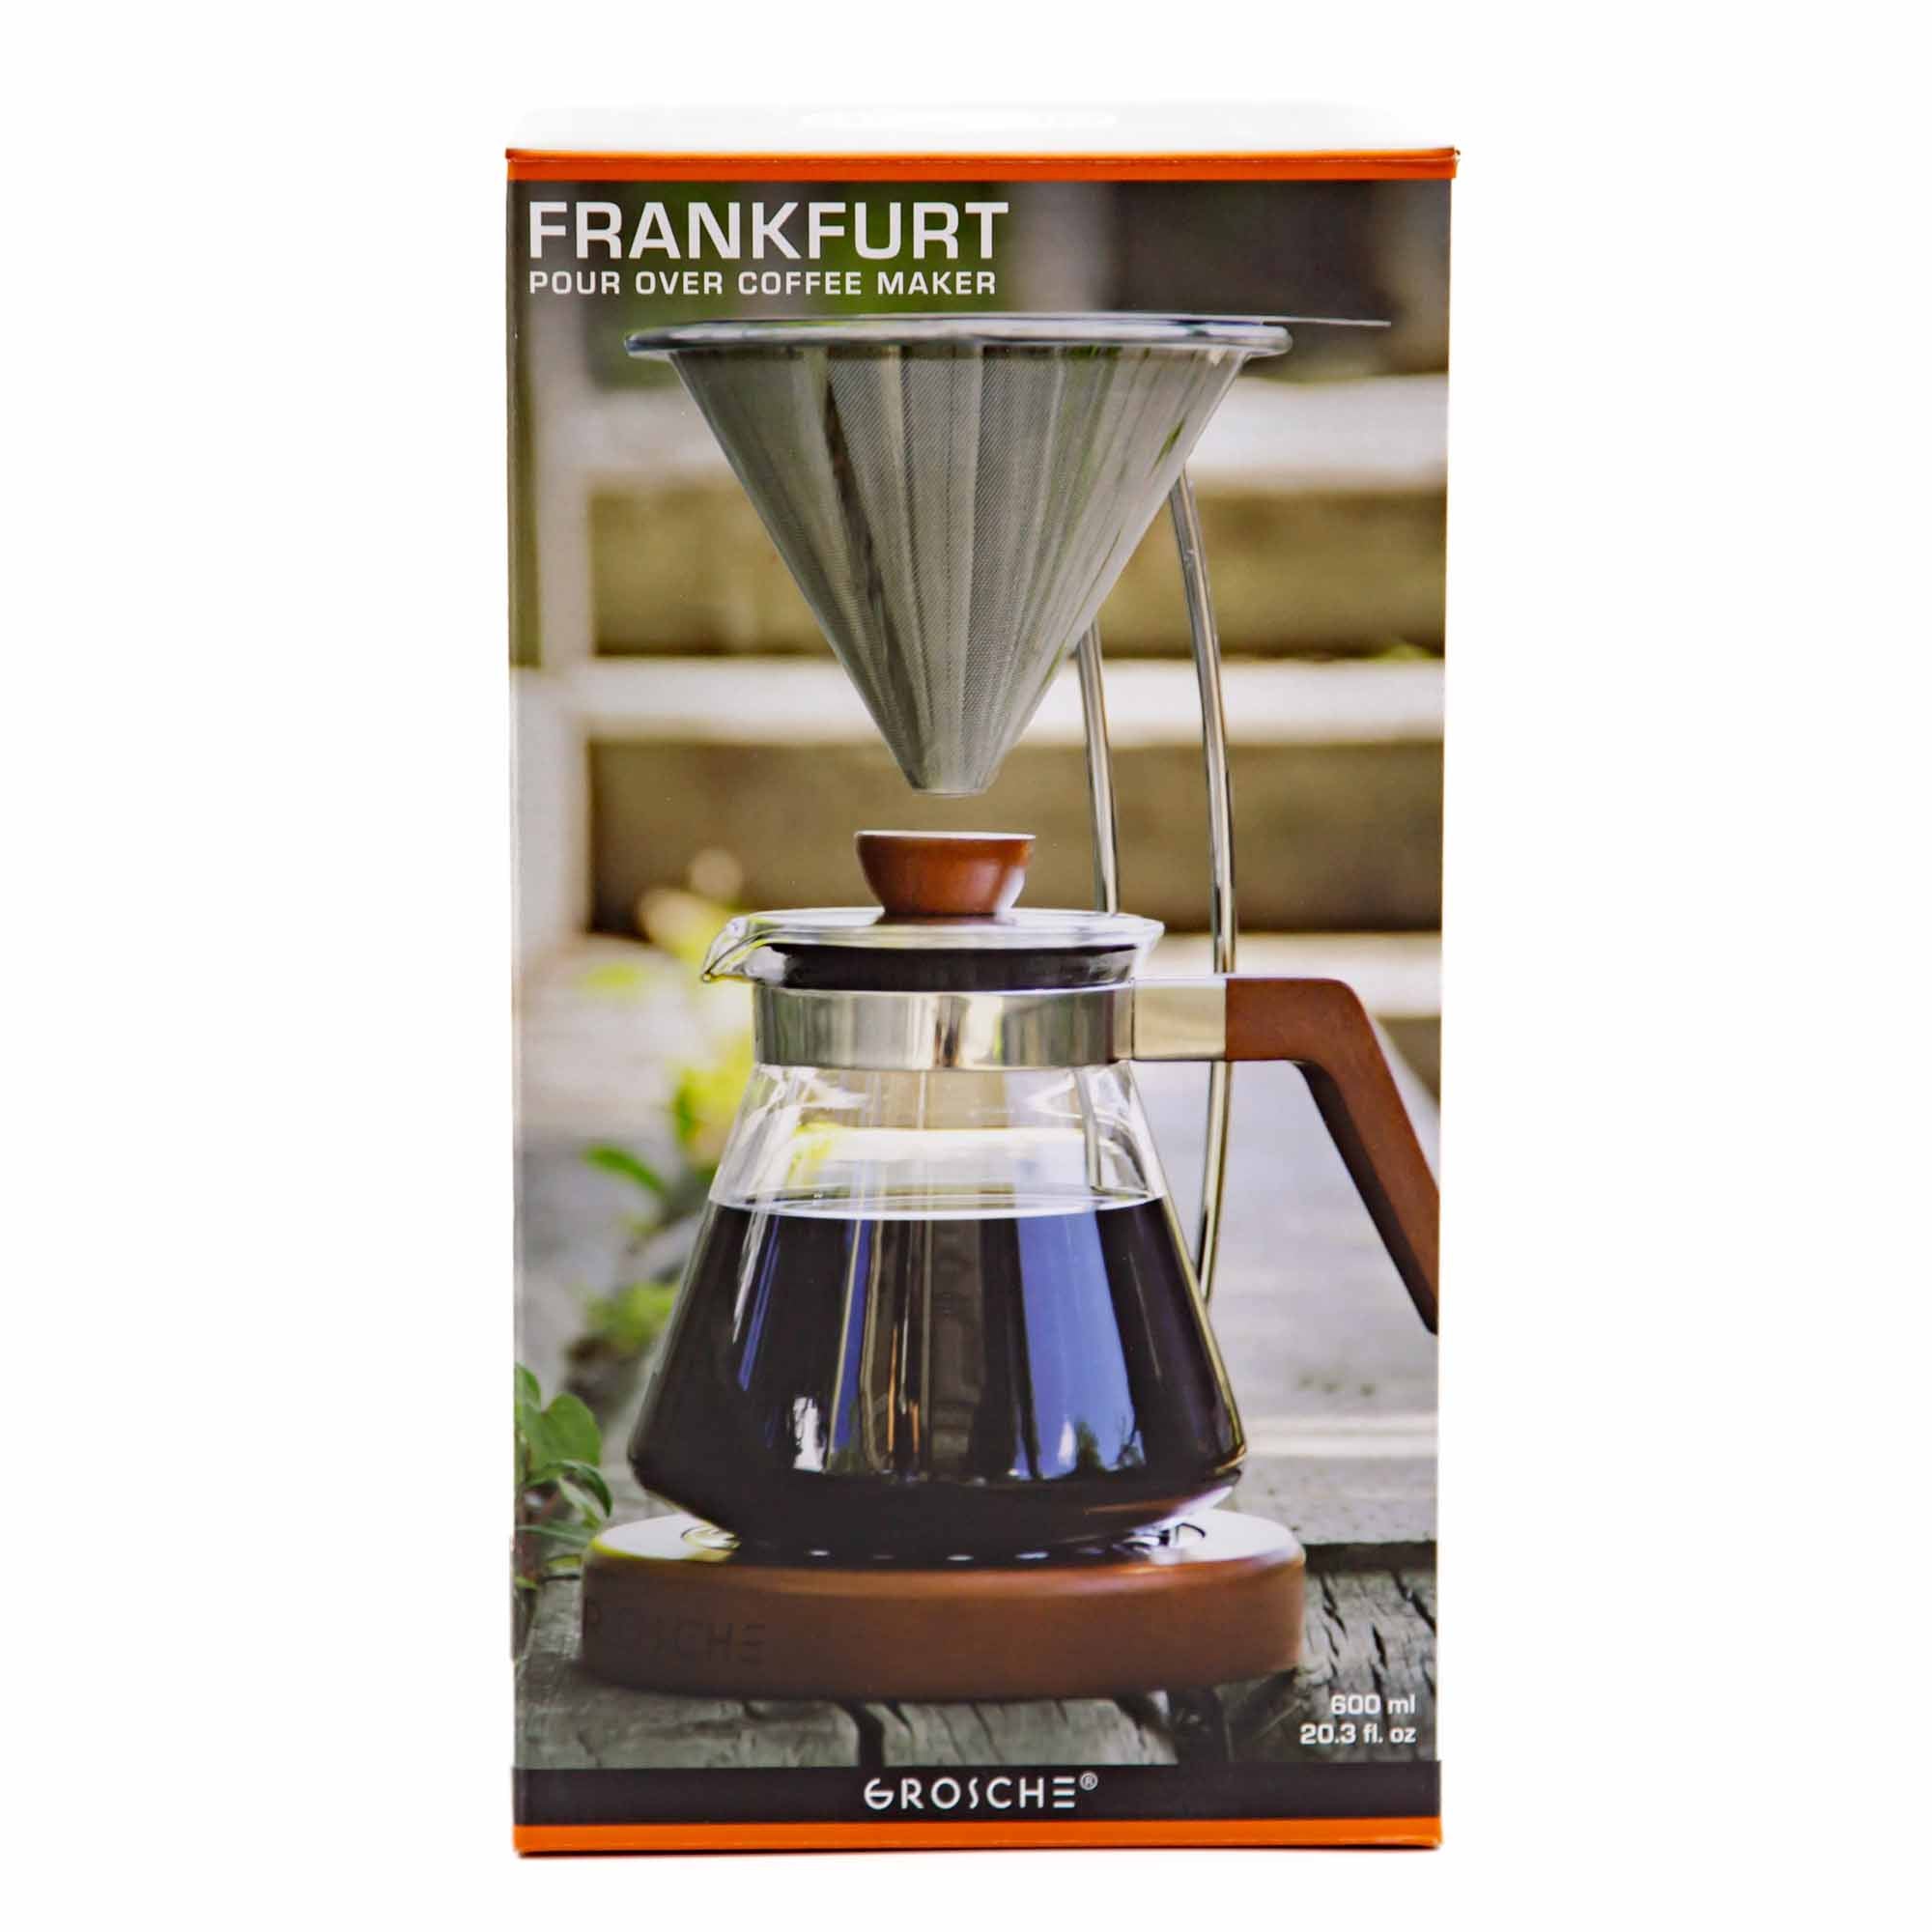 Grosche Frankfurt Pour Over Coffee Maker - Mortise And Tenon